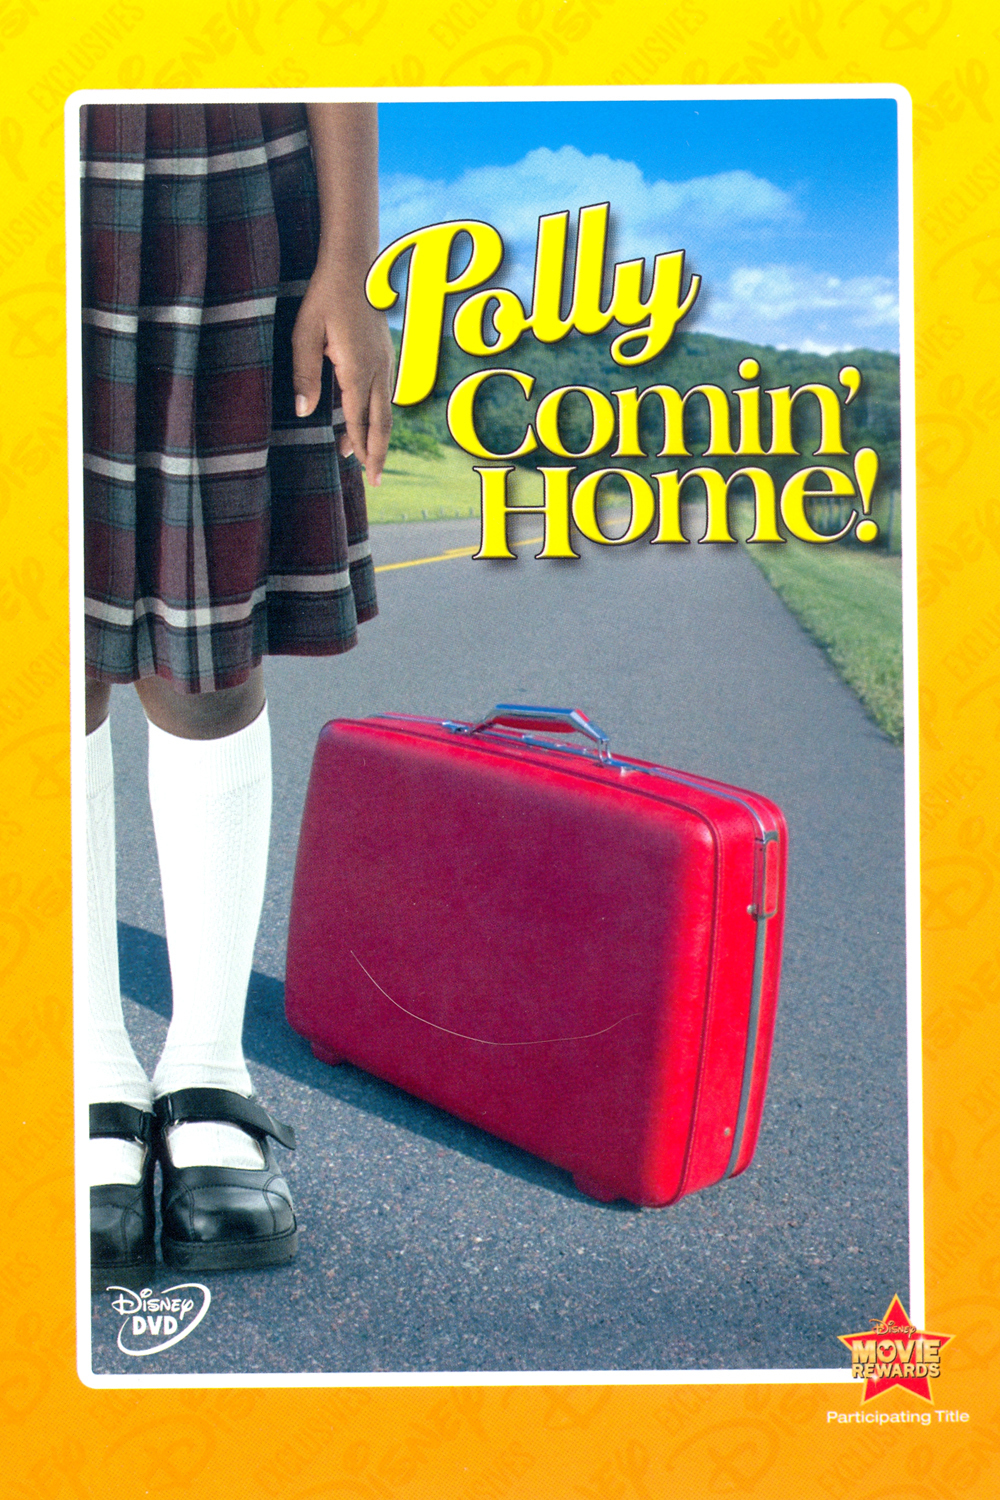 affiche du film Polly: Comin' Home!